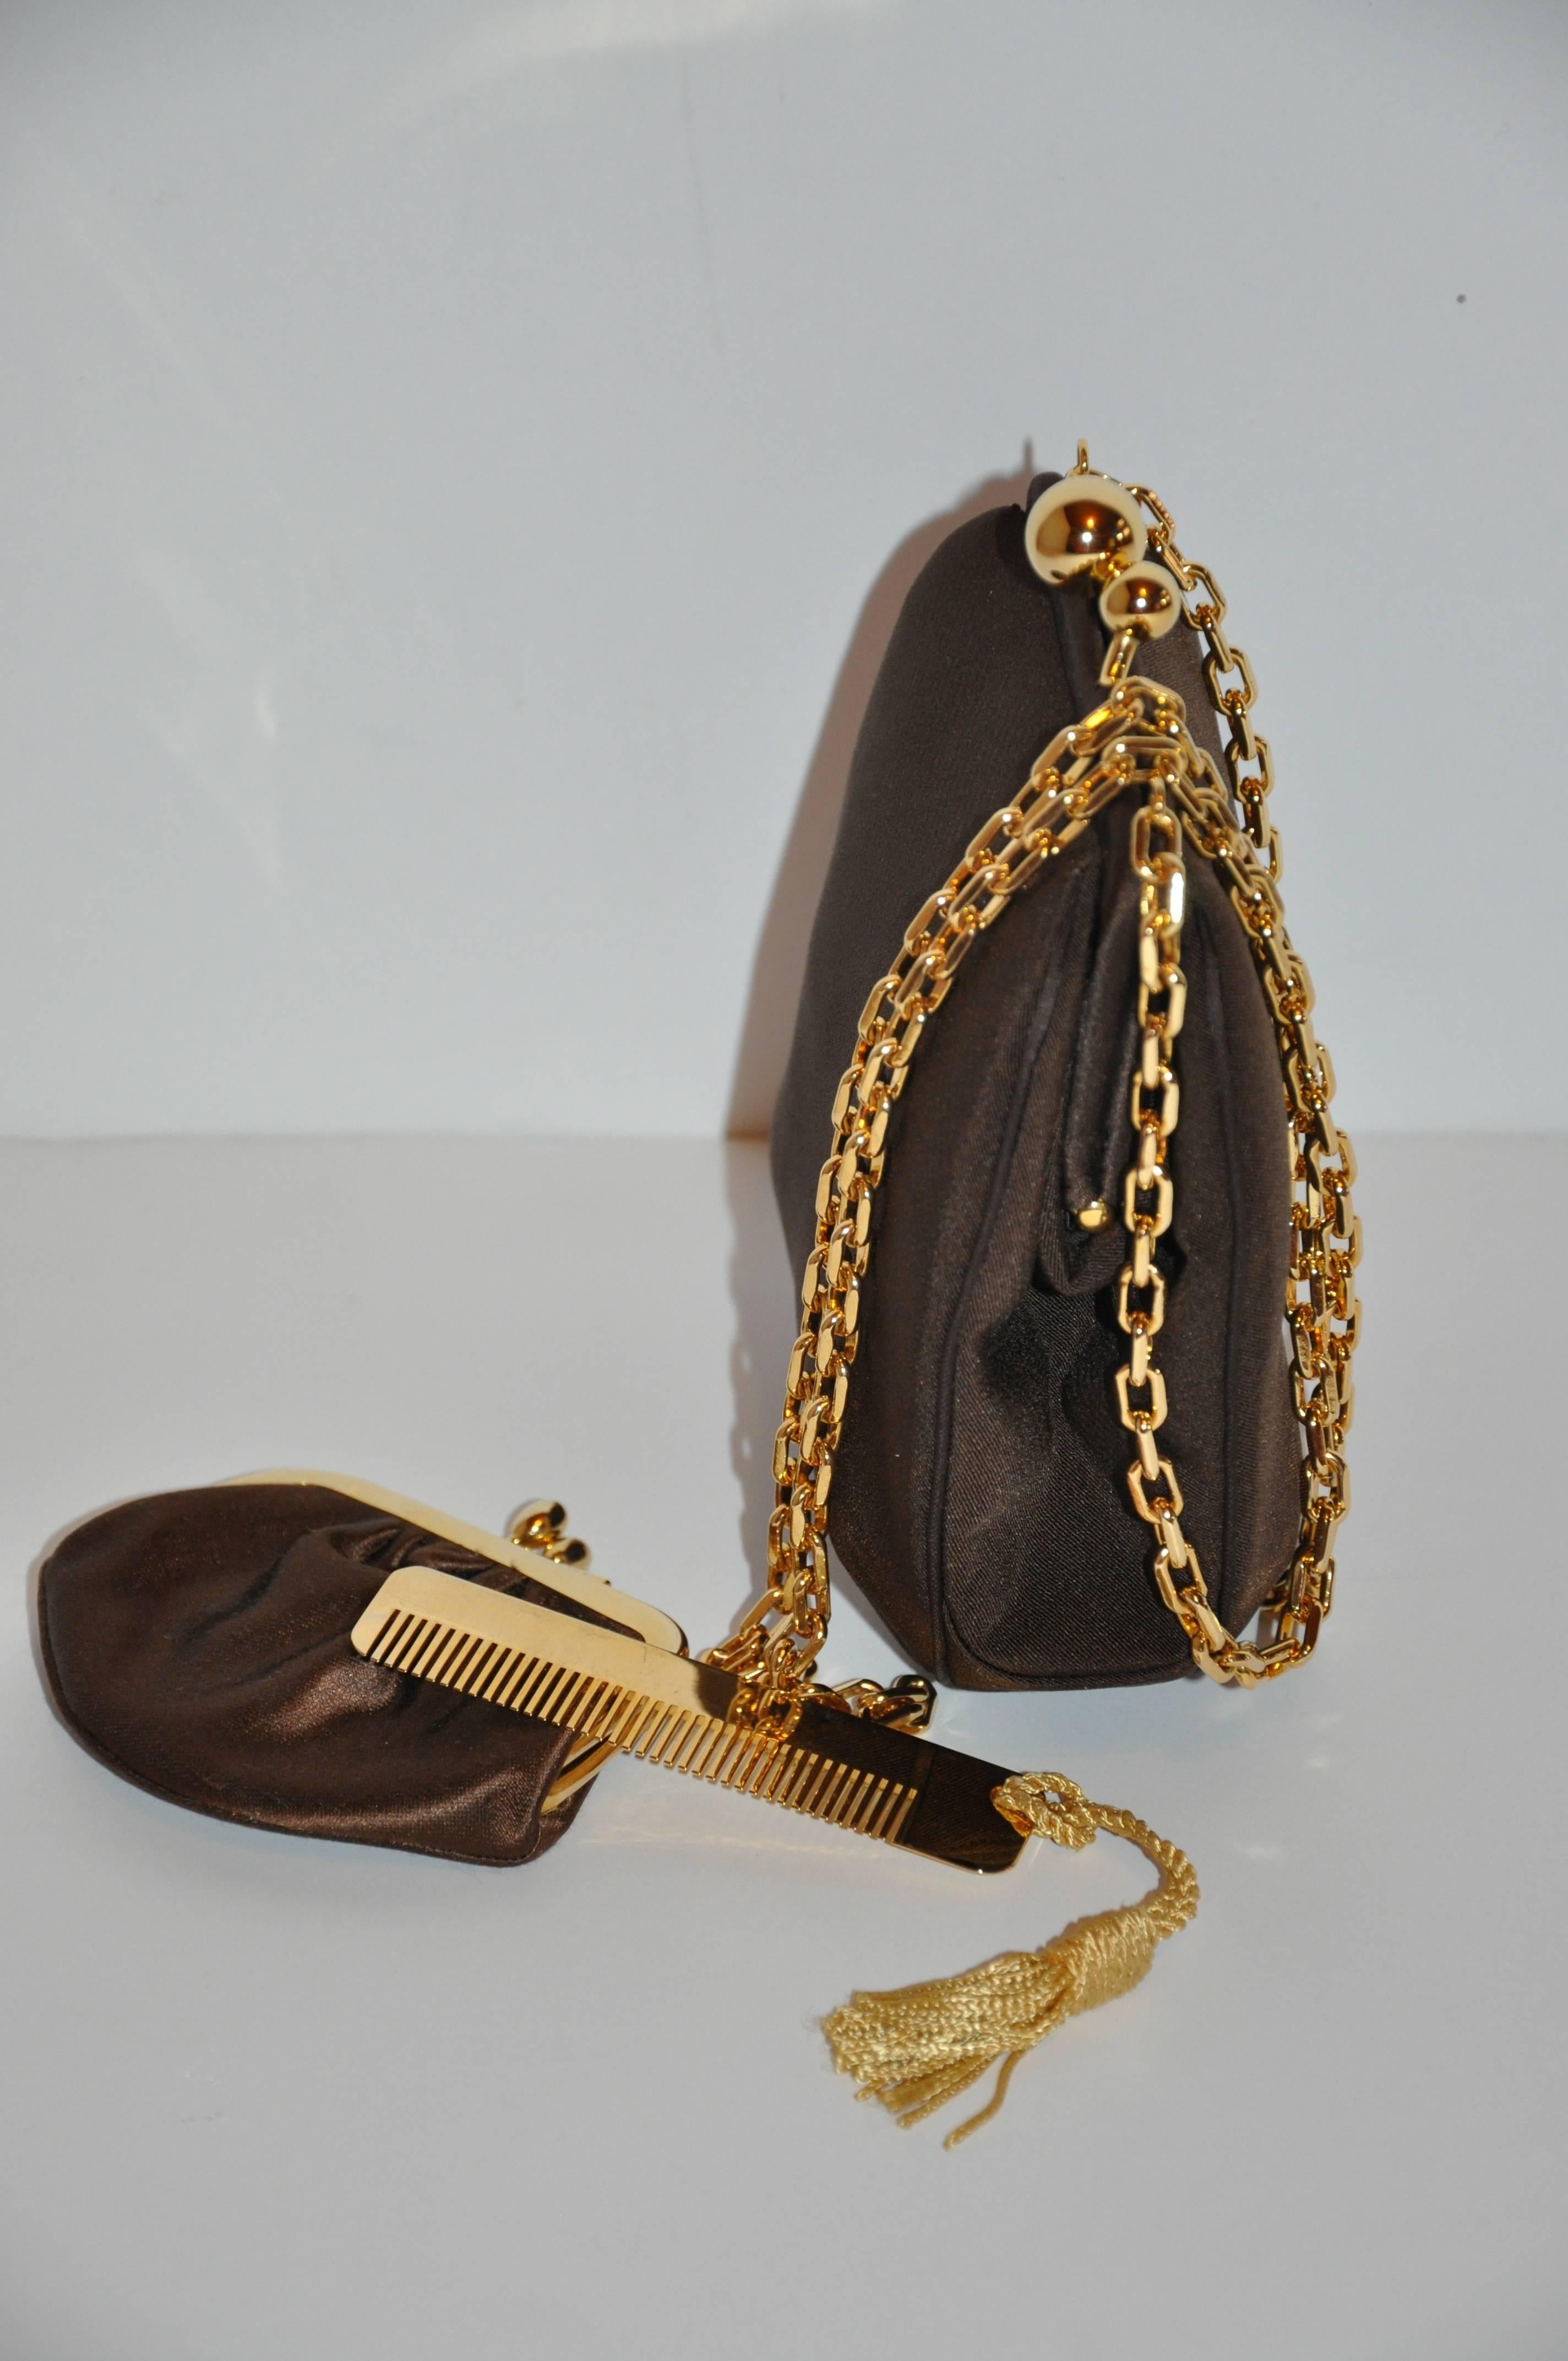         Judith Leiber wonderfully whimsical yet elegant textured coco-brown silk evening shoulder bag is accented with vermeil-finished gold hardware. The fully lined interior is paired with a gold hardware comb which is accented with a tassel as